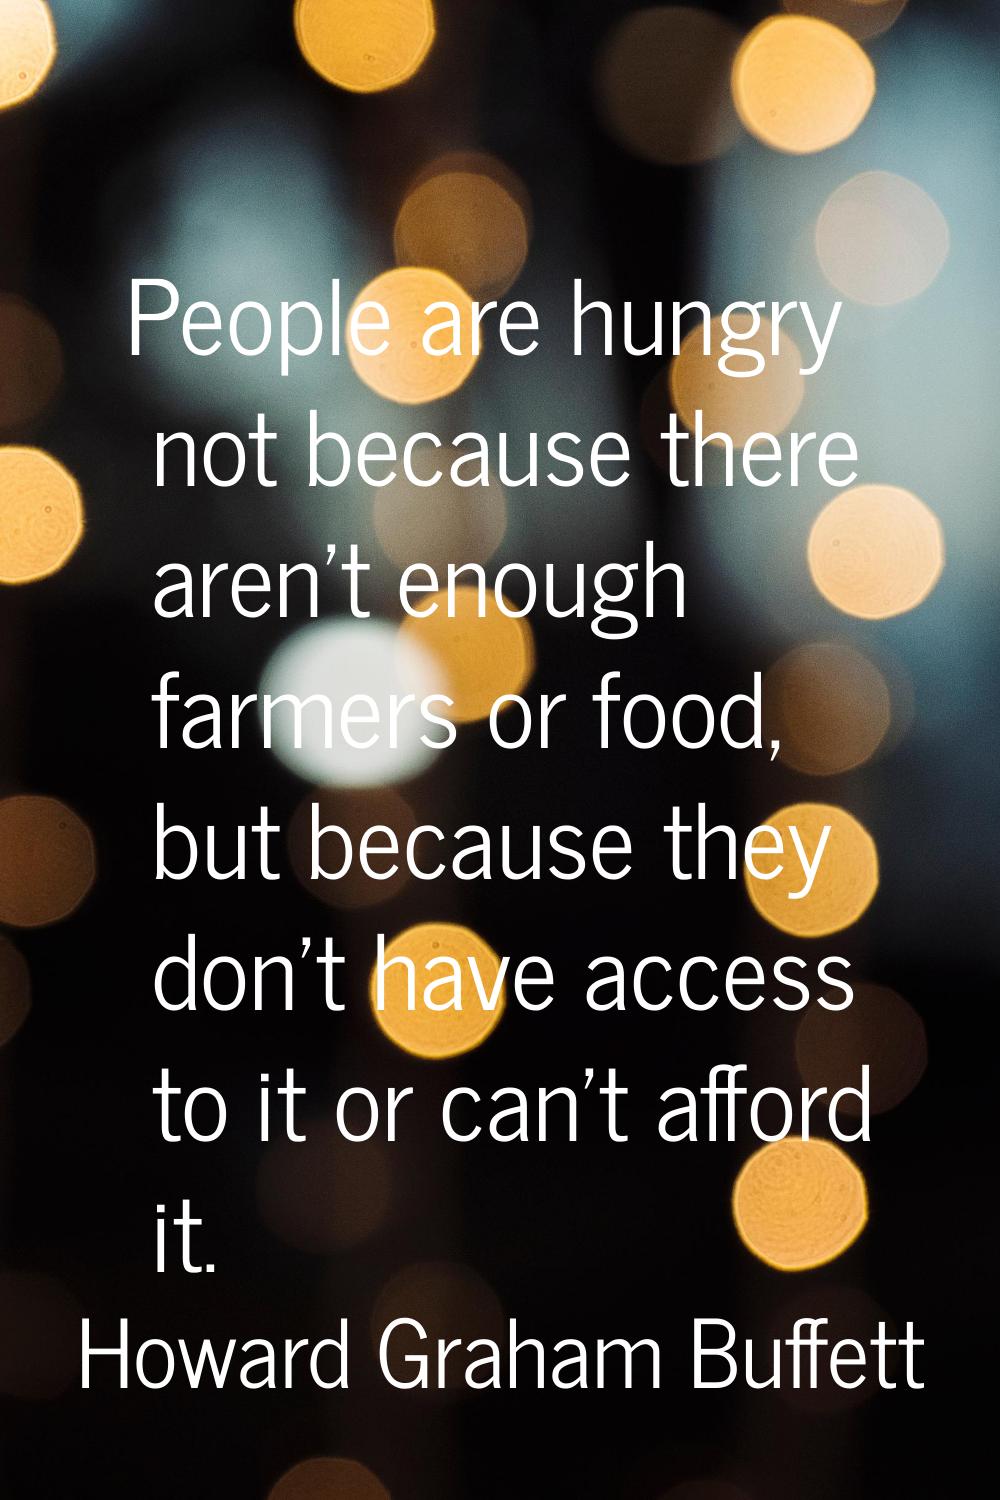 People are hungry not because there aren't enough farmers or food, but because they don't have acce